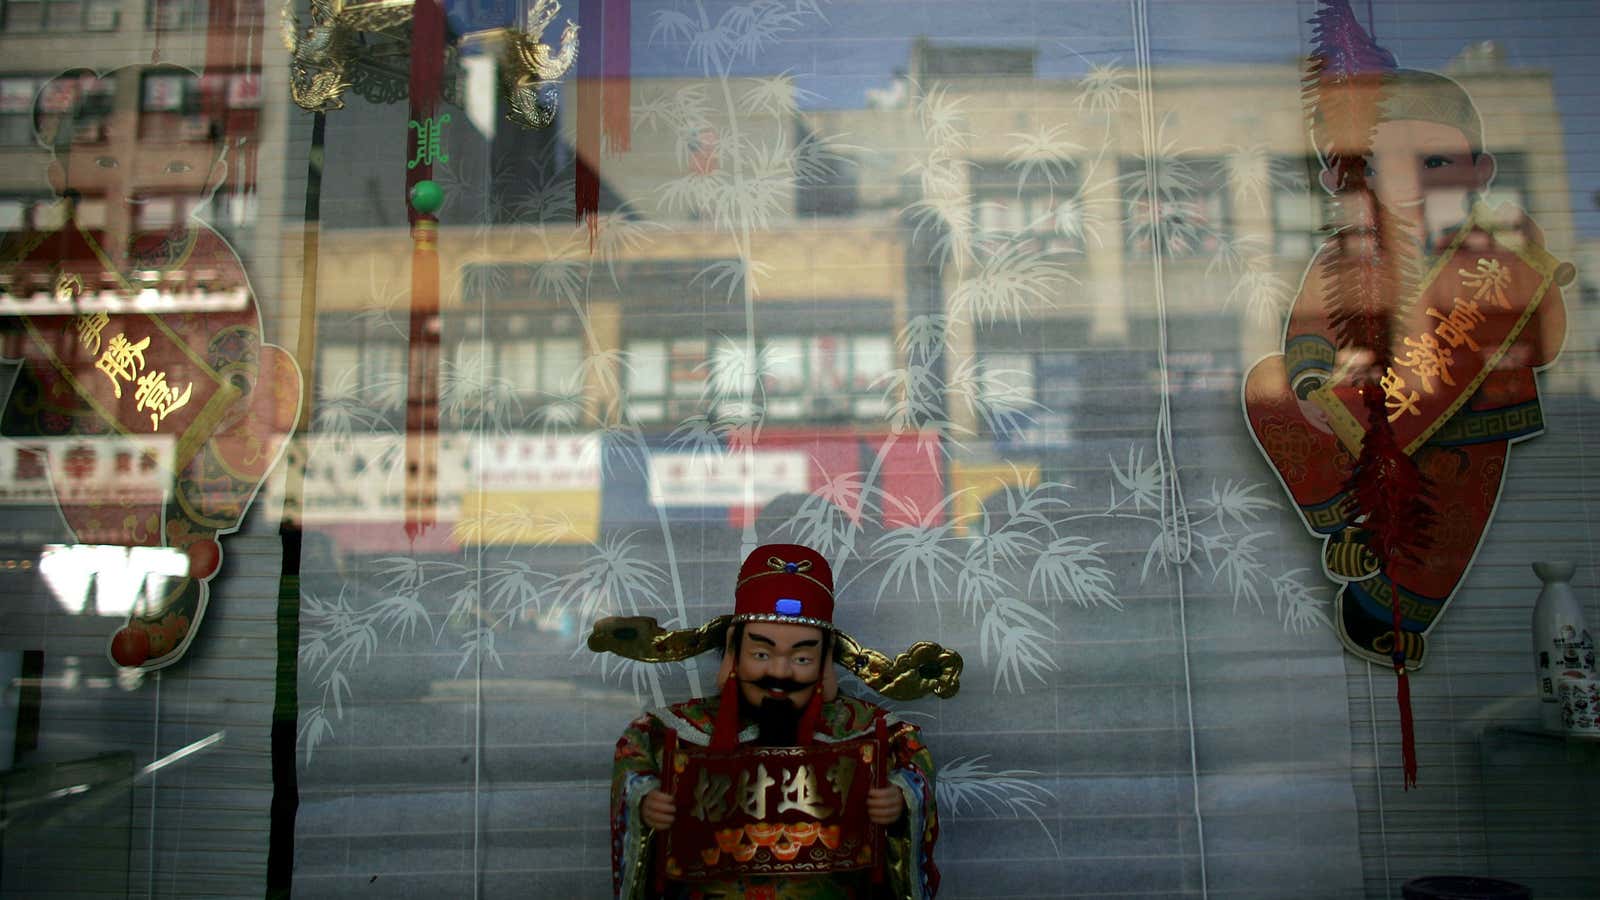 Chinatown and its workers felt the economic effects from the 9/11 terrorist attacks for years.